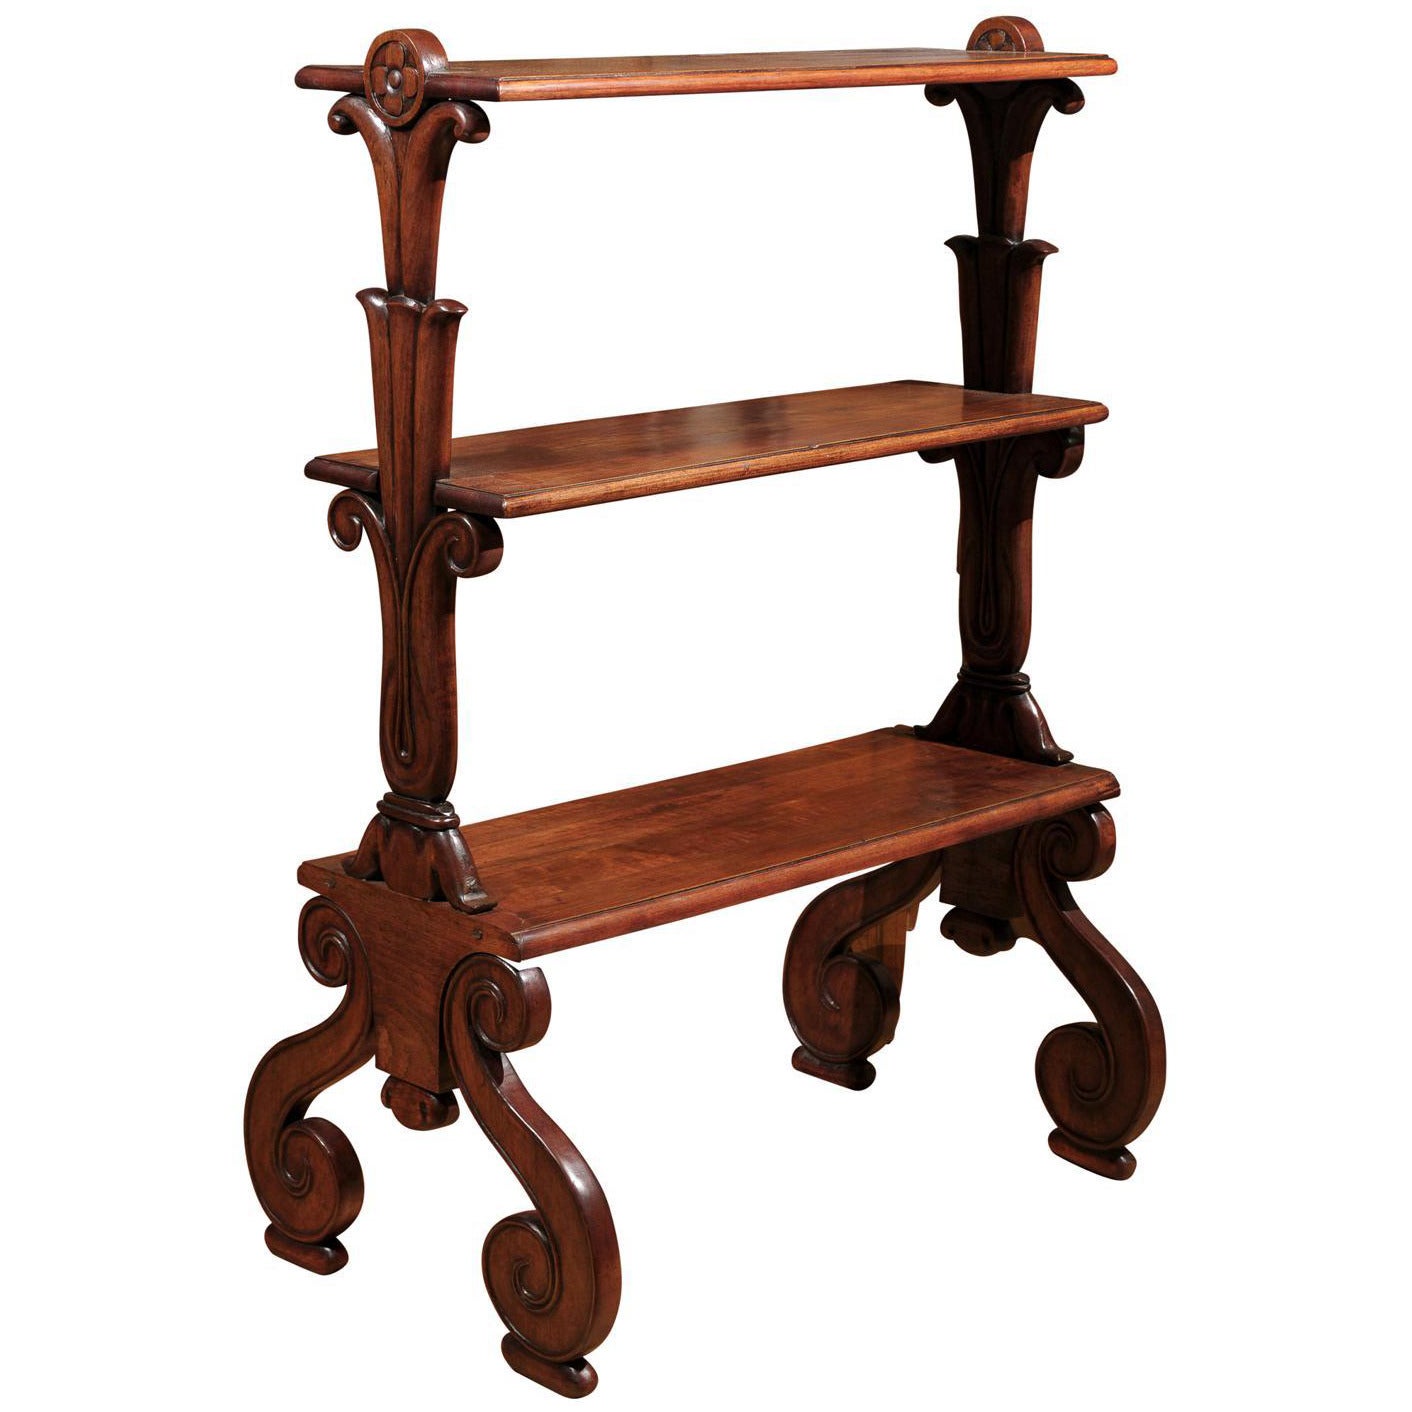 Mahogany Three-Tiered Shelf with Scrolled Legs from the Late 19th Century